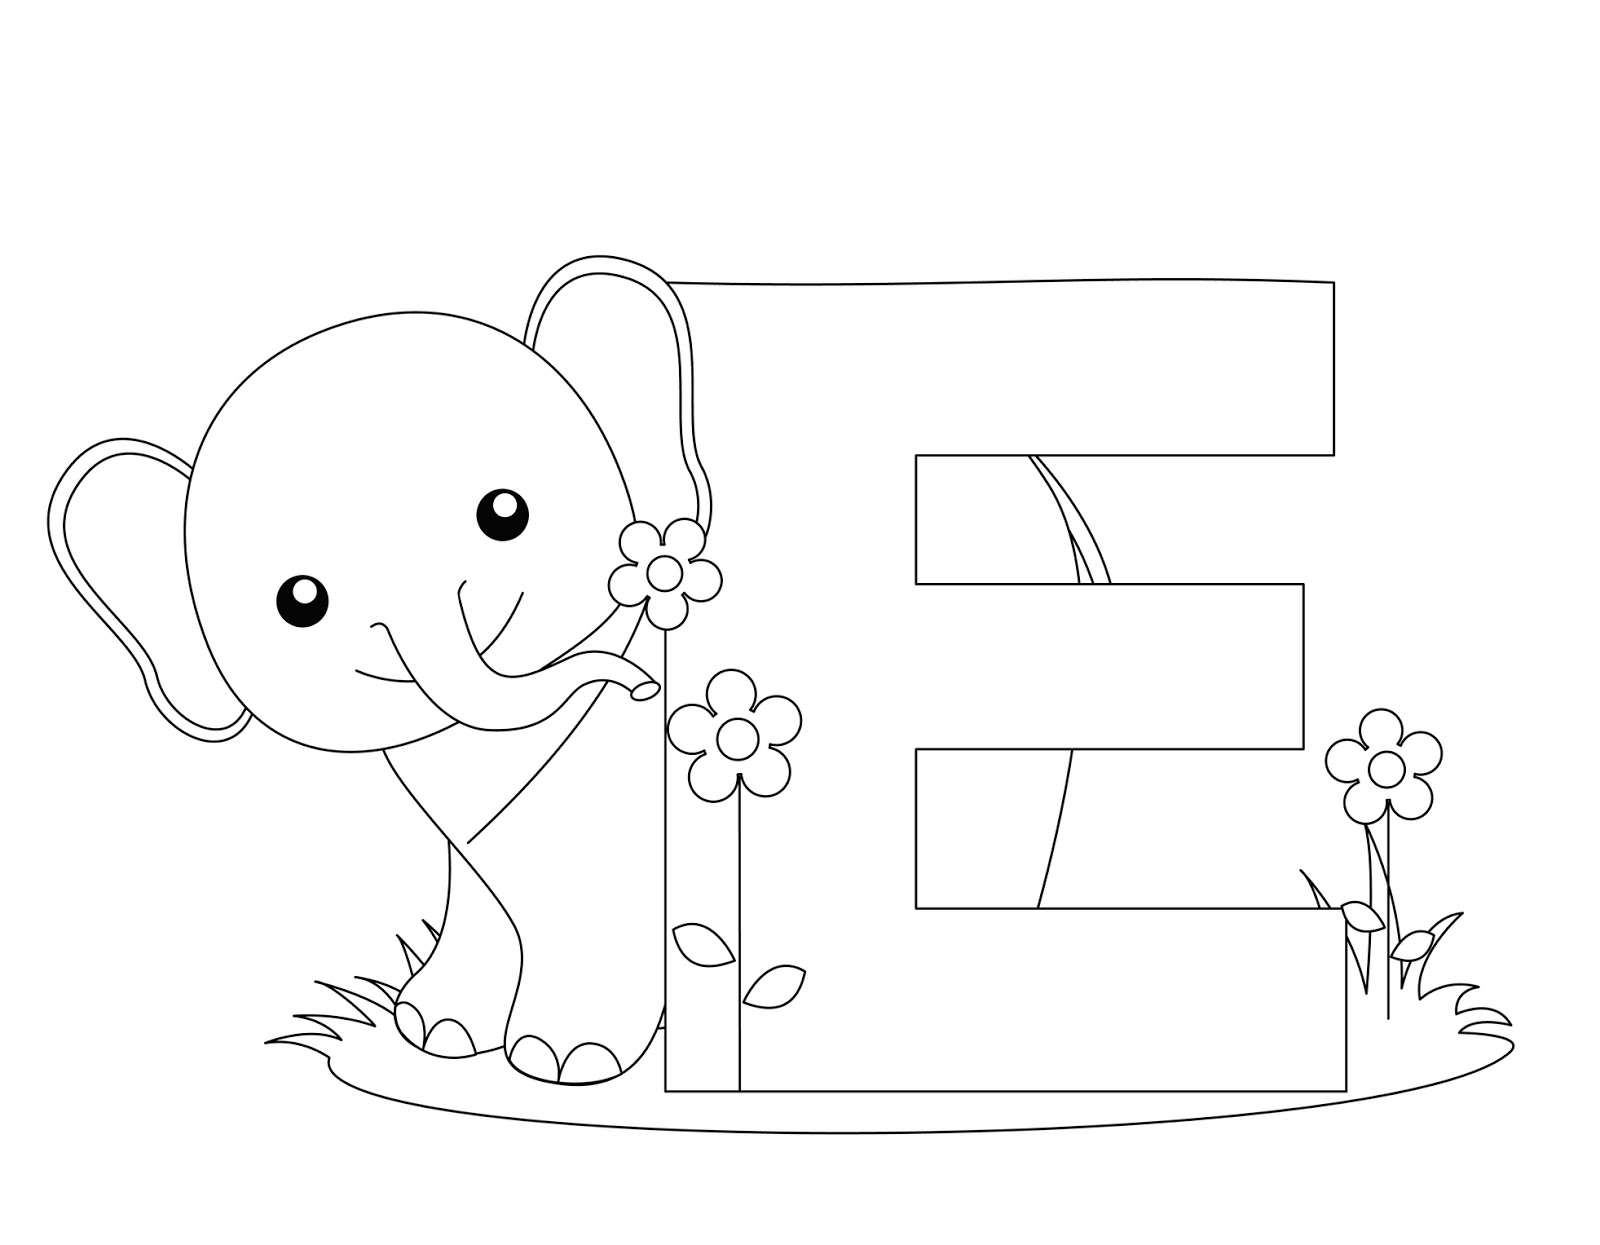 a phabet coloring pages - photo #39